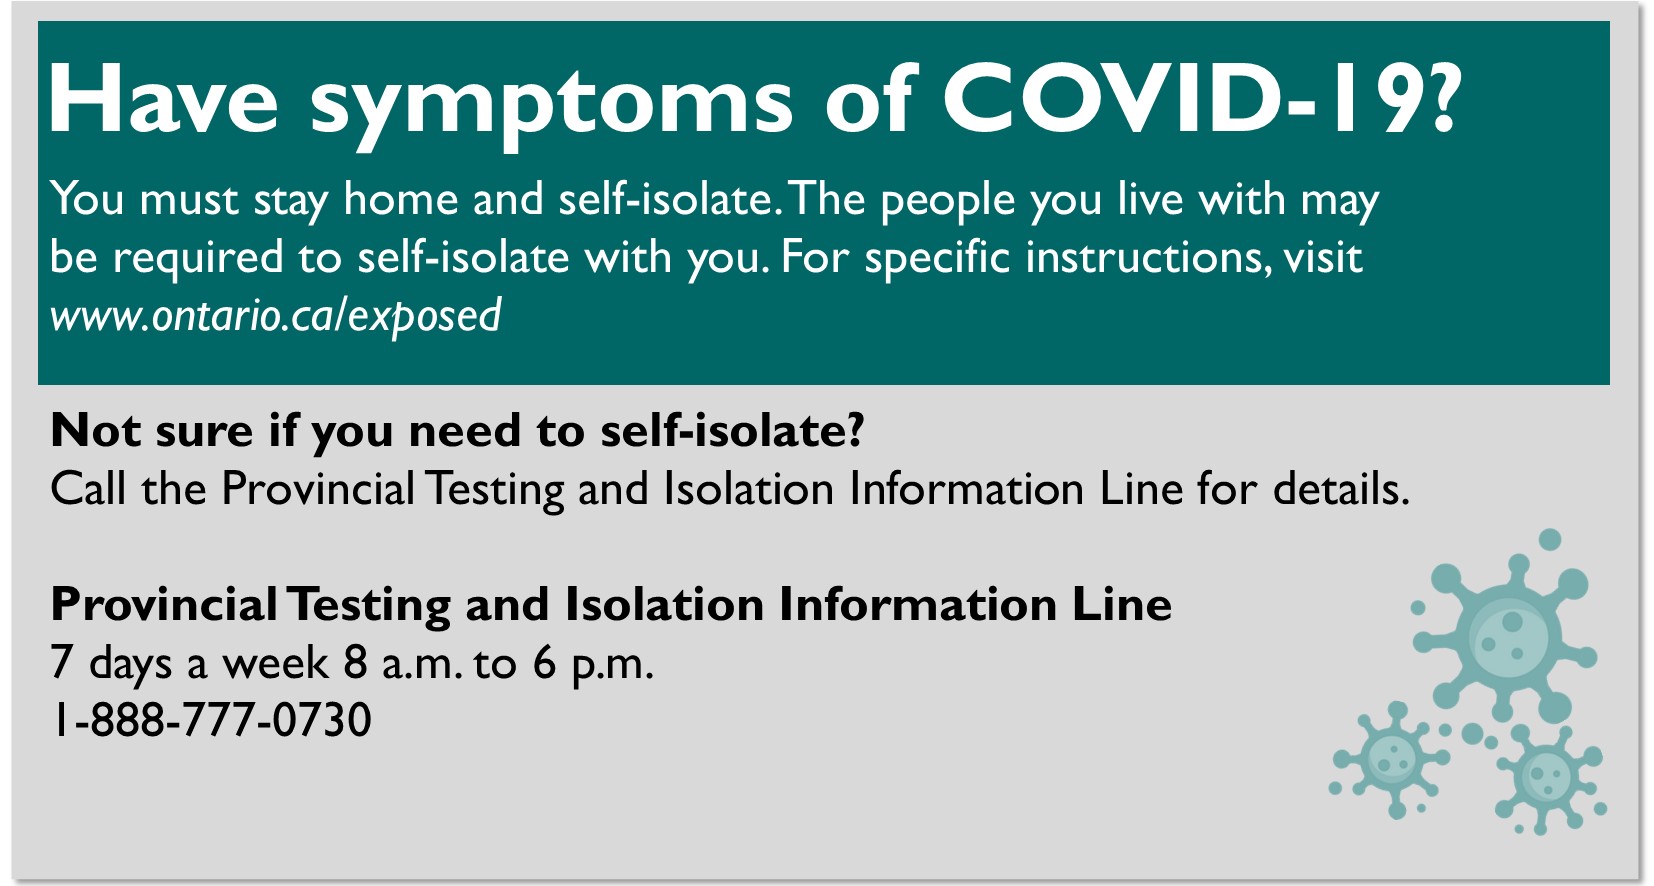 THU COVID-19 Line 705-647-4305, Ext. 7. Provincial Testing and Isolation Information Line 1-888-777-0730